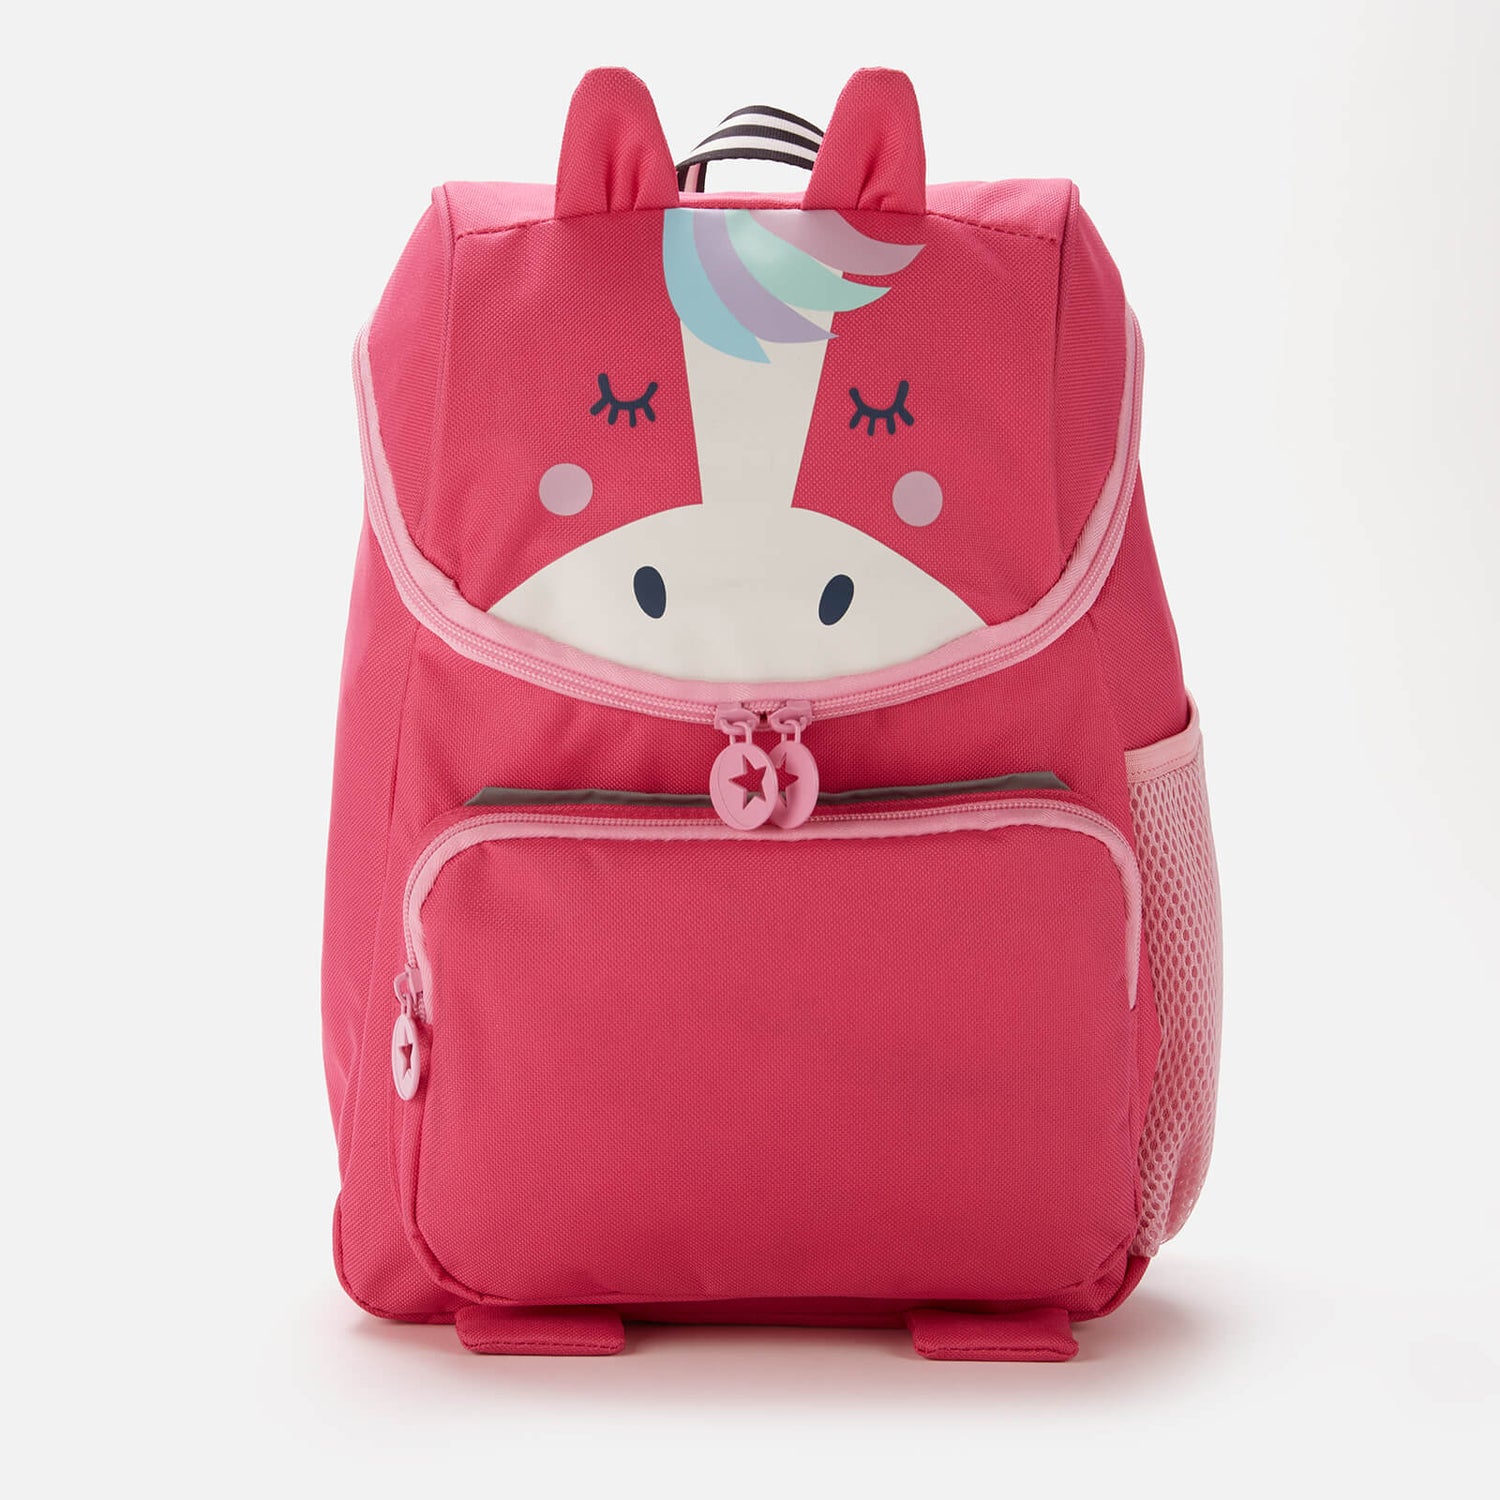 Joules Kids' Character Backpack - Pink Unicorn - One Size